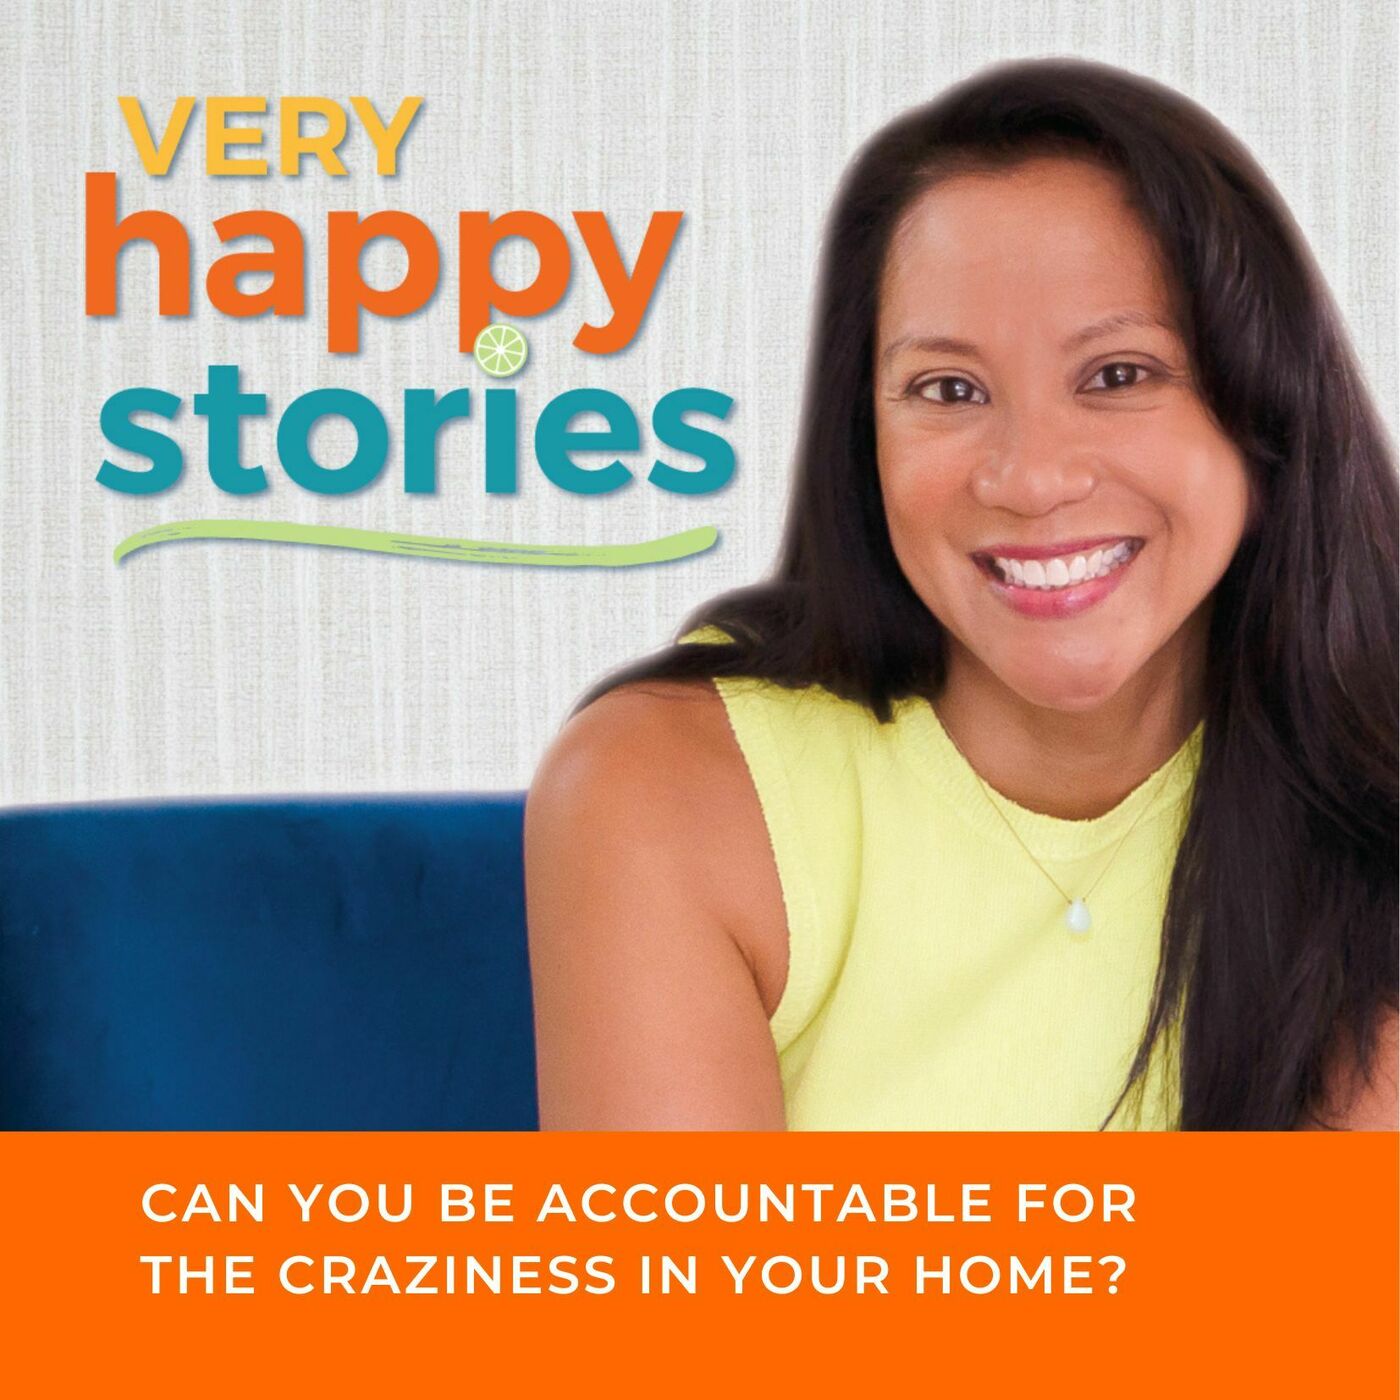 61: Can You Be Accountable for the Craziness in Your Home? This Question Offended Me and Shockingly Helped Me Heal